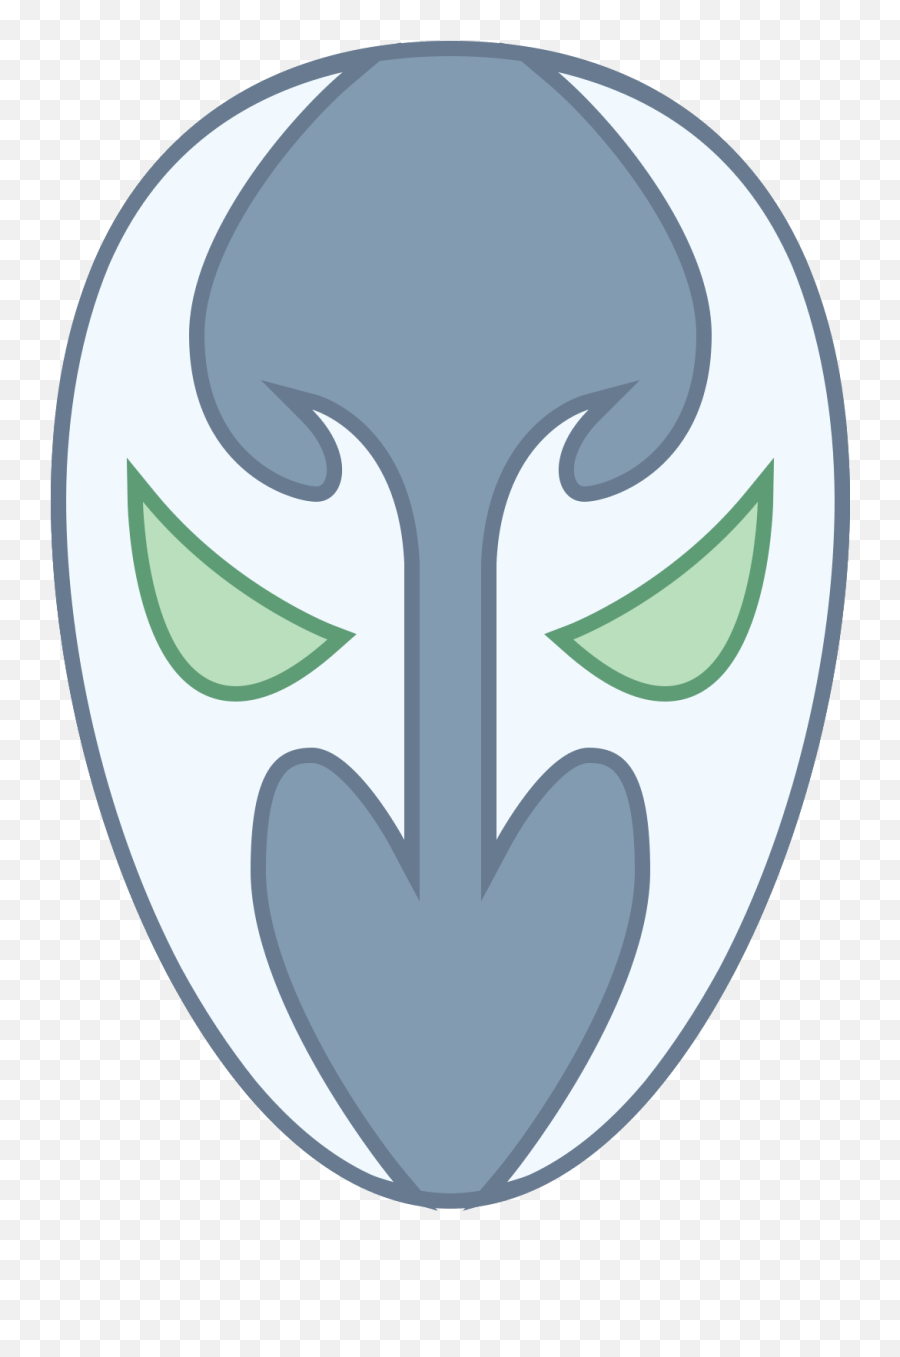 Download Hd Png 50 Px - For Adult Emoji,Spawn Png